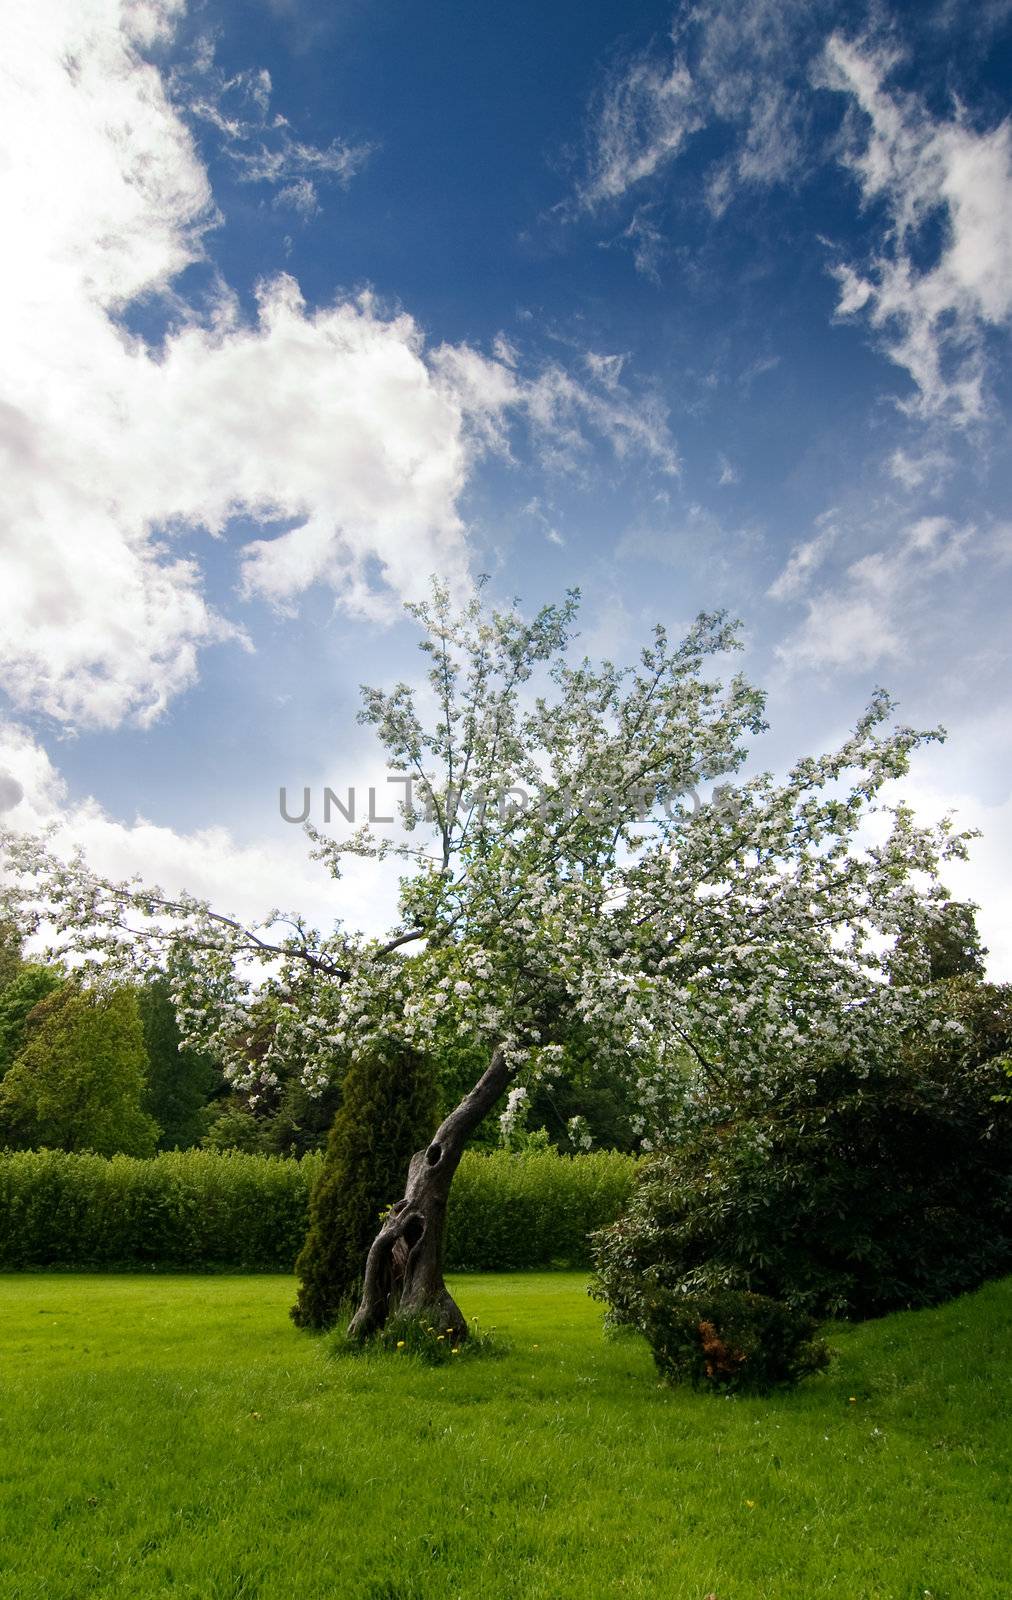 An old apple tree with a dramatic sky